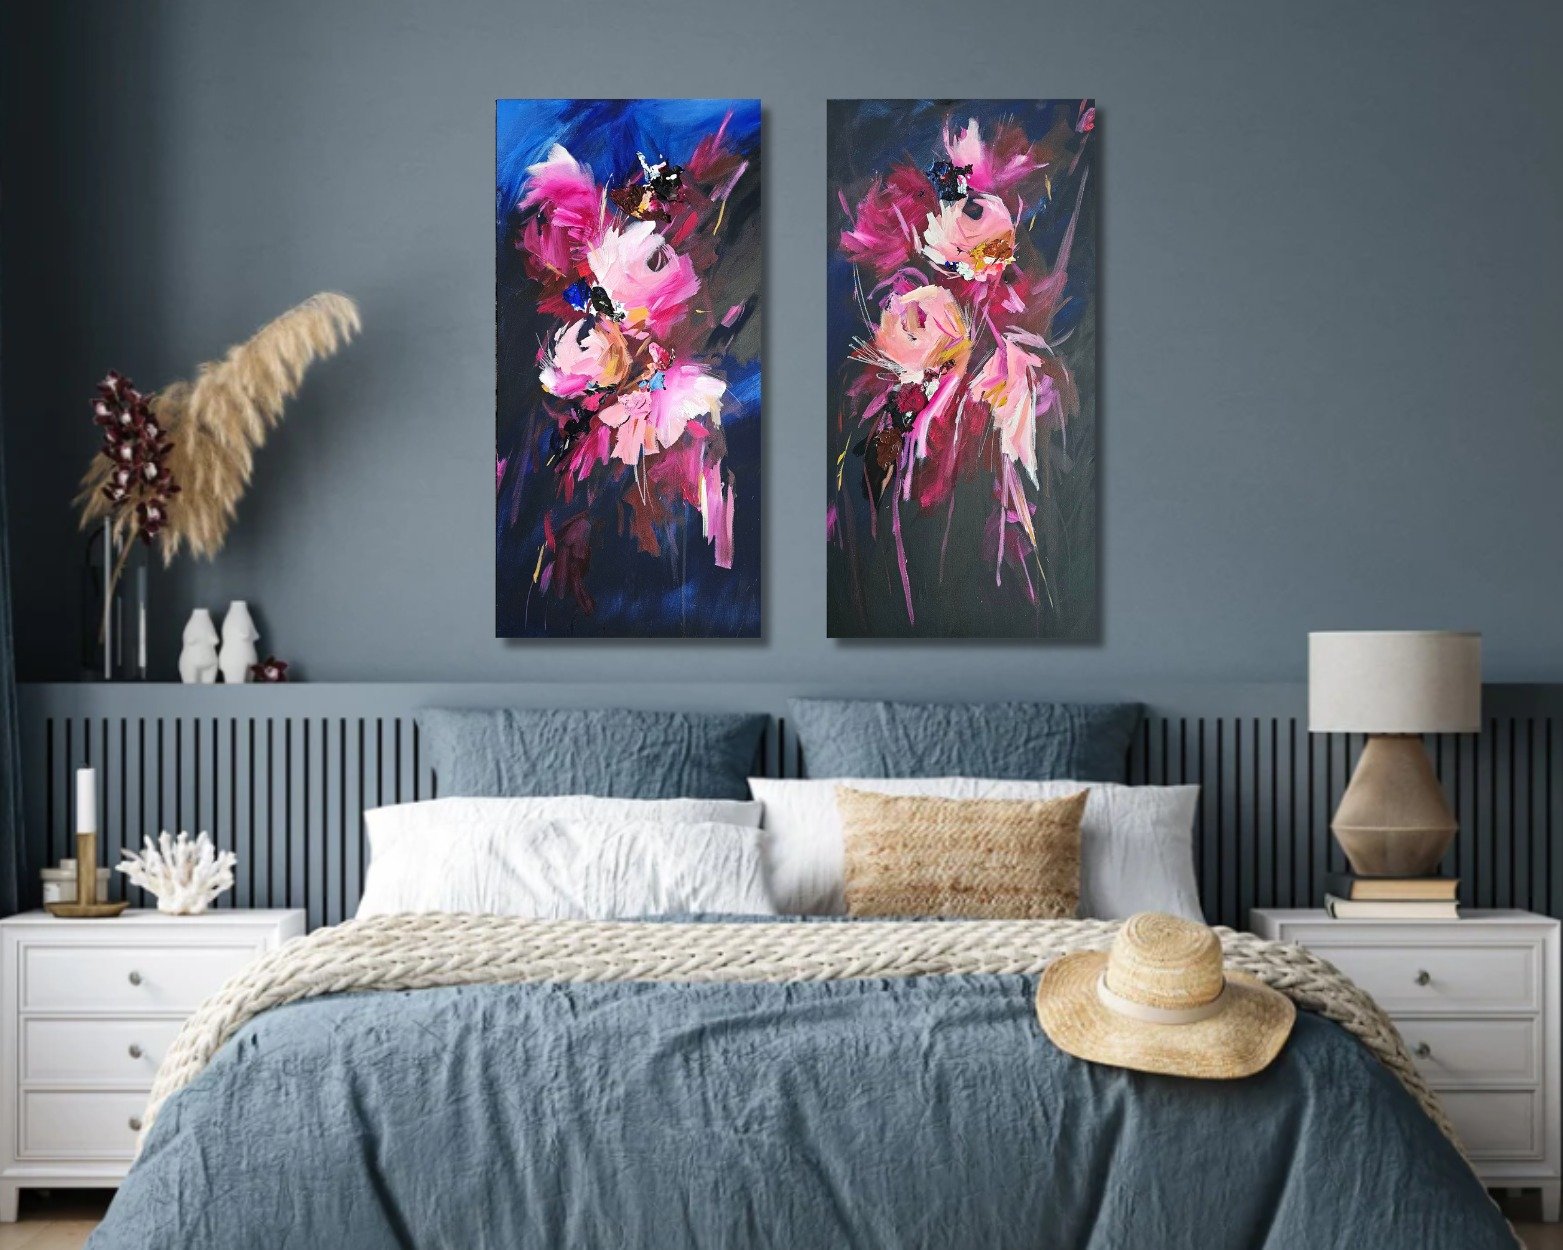 HOT off the press!
It's a sweet miracle I got these two finished and listed today. 
They are so beautiful together and therefore I've named them, Beautiful Things 1 &amp; 2.
With yummy rich midnight blue backgrounds and lush pinks, these pieces are f